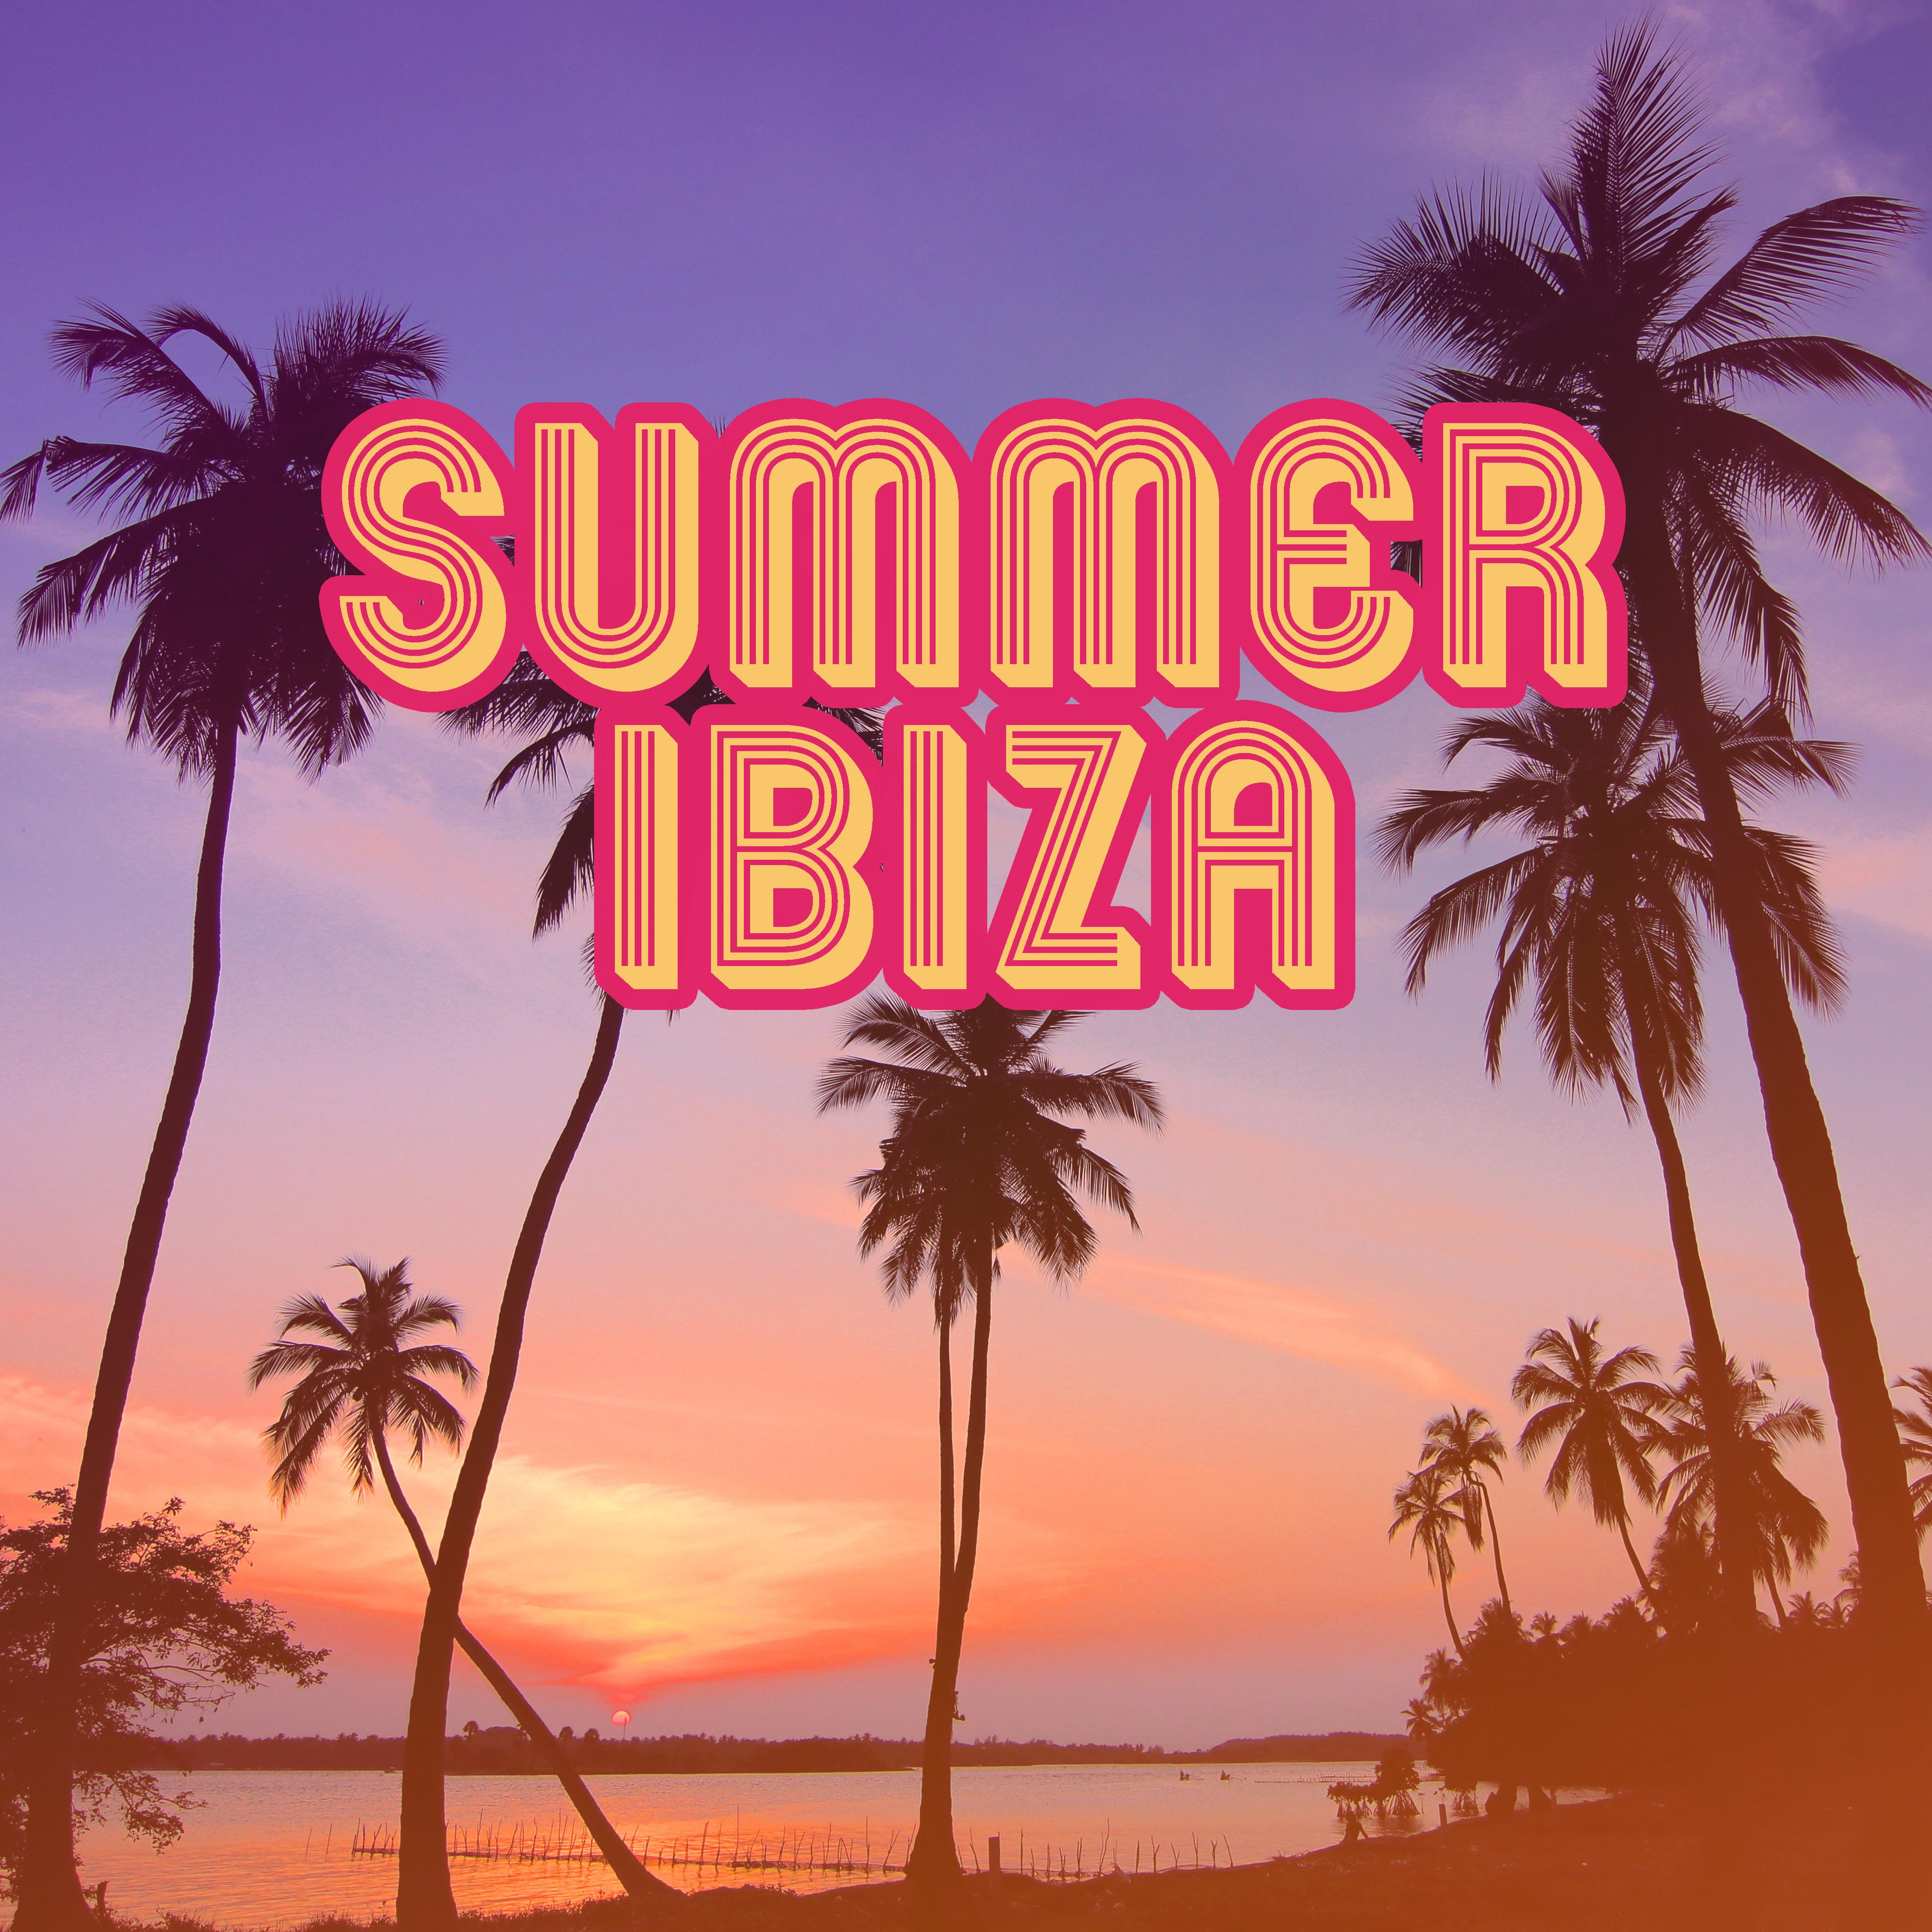 Summer Ibiza – Chill Out 2017, Relax & Chill, Vacation Hits, Dance Party on the Beach